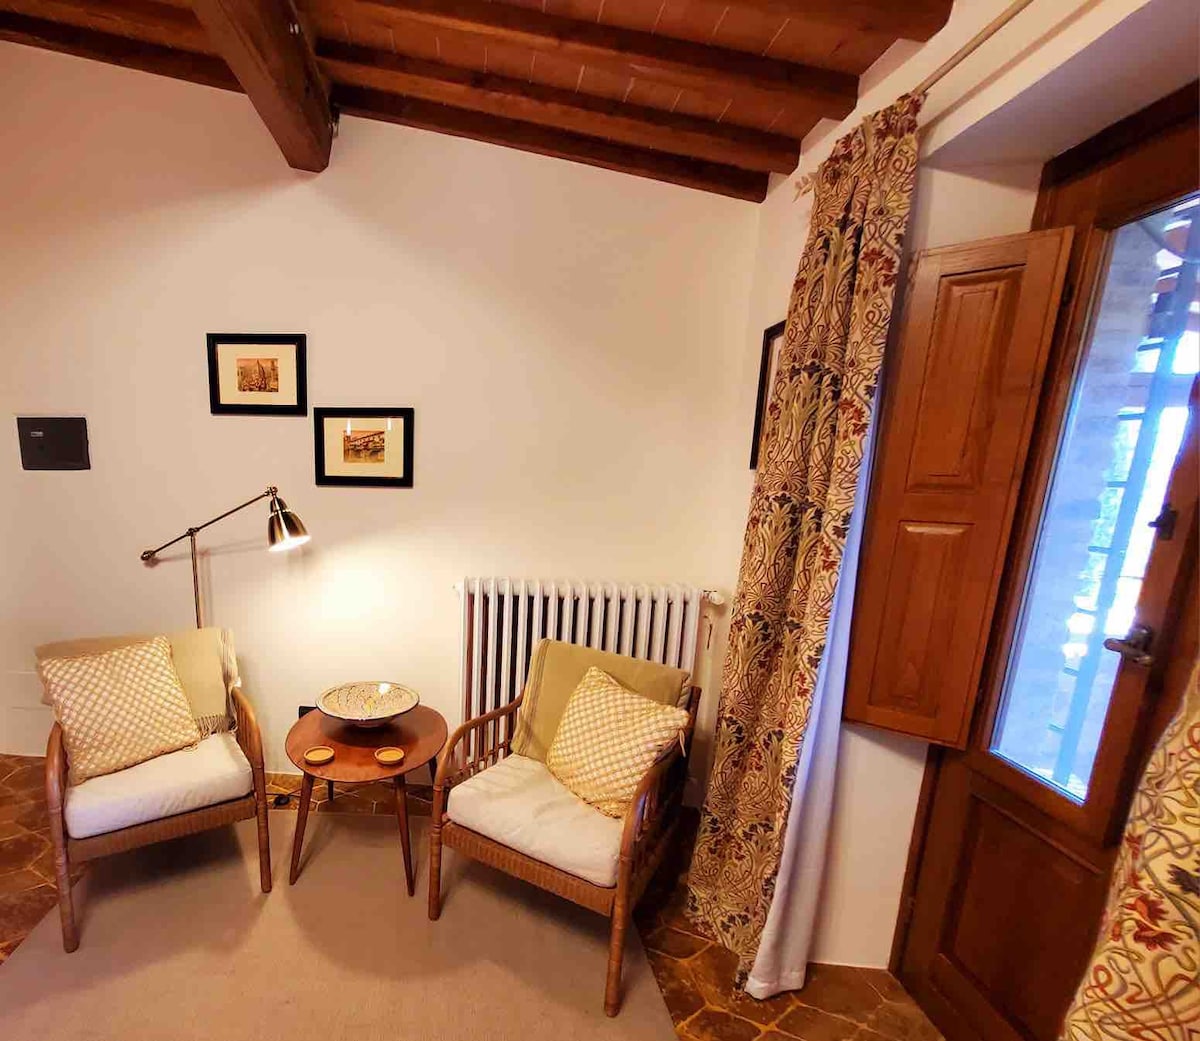 Luxury Tuscan farm stay, 1 - bedroom with a pool